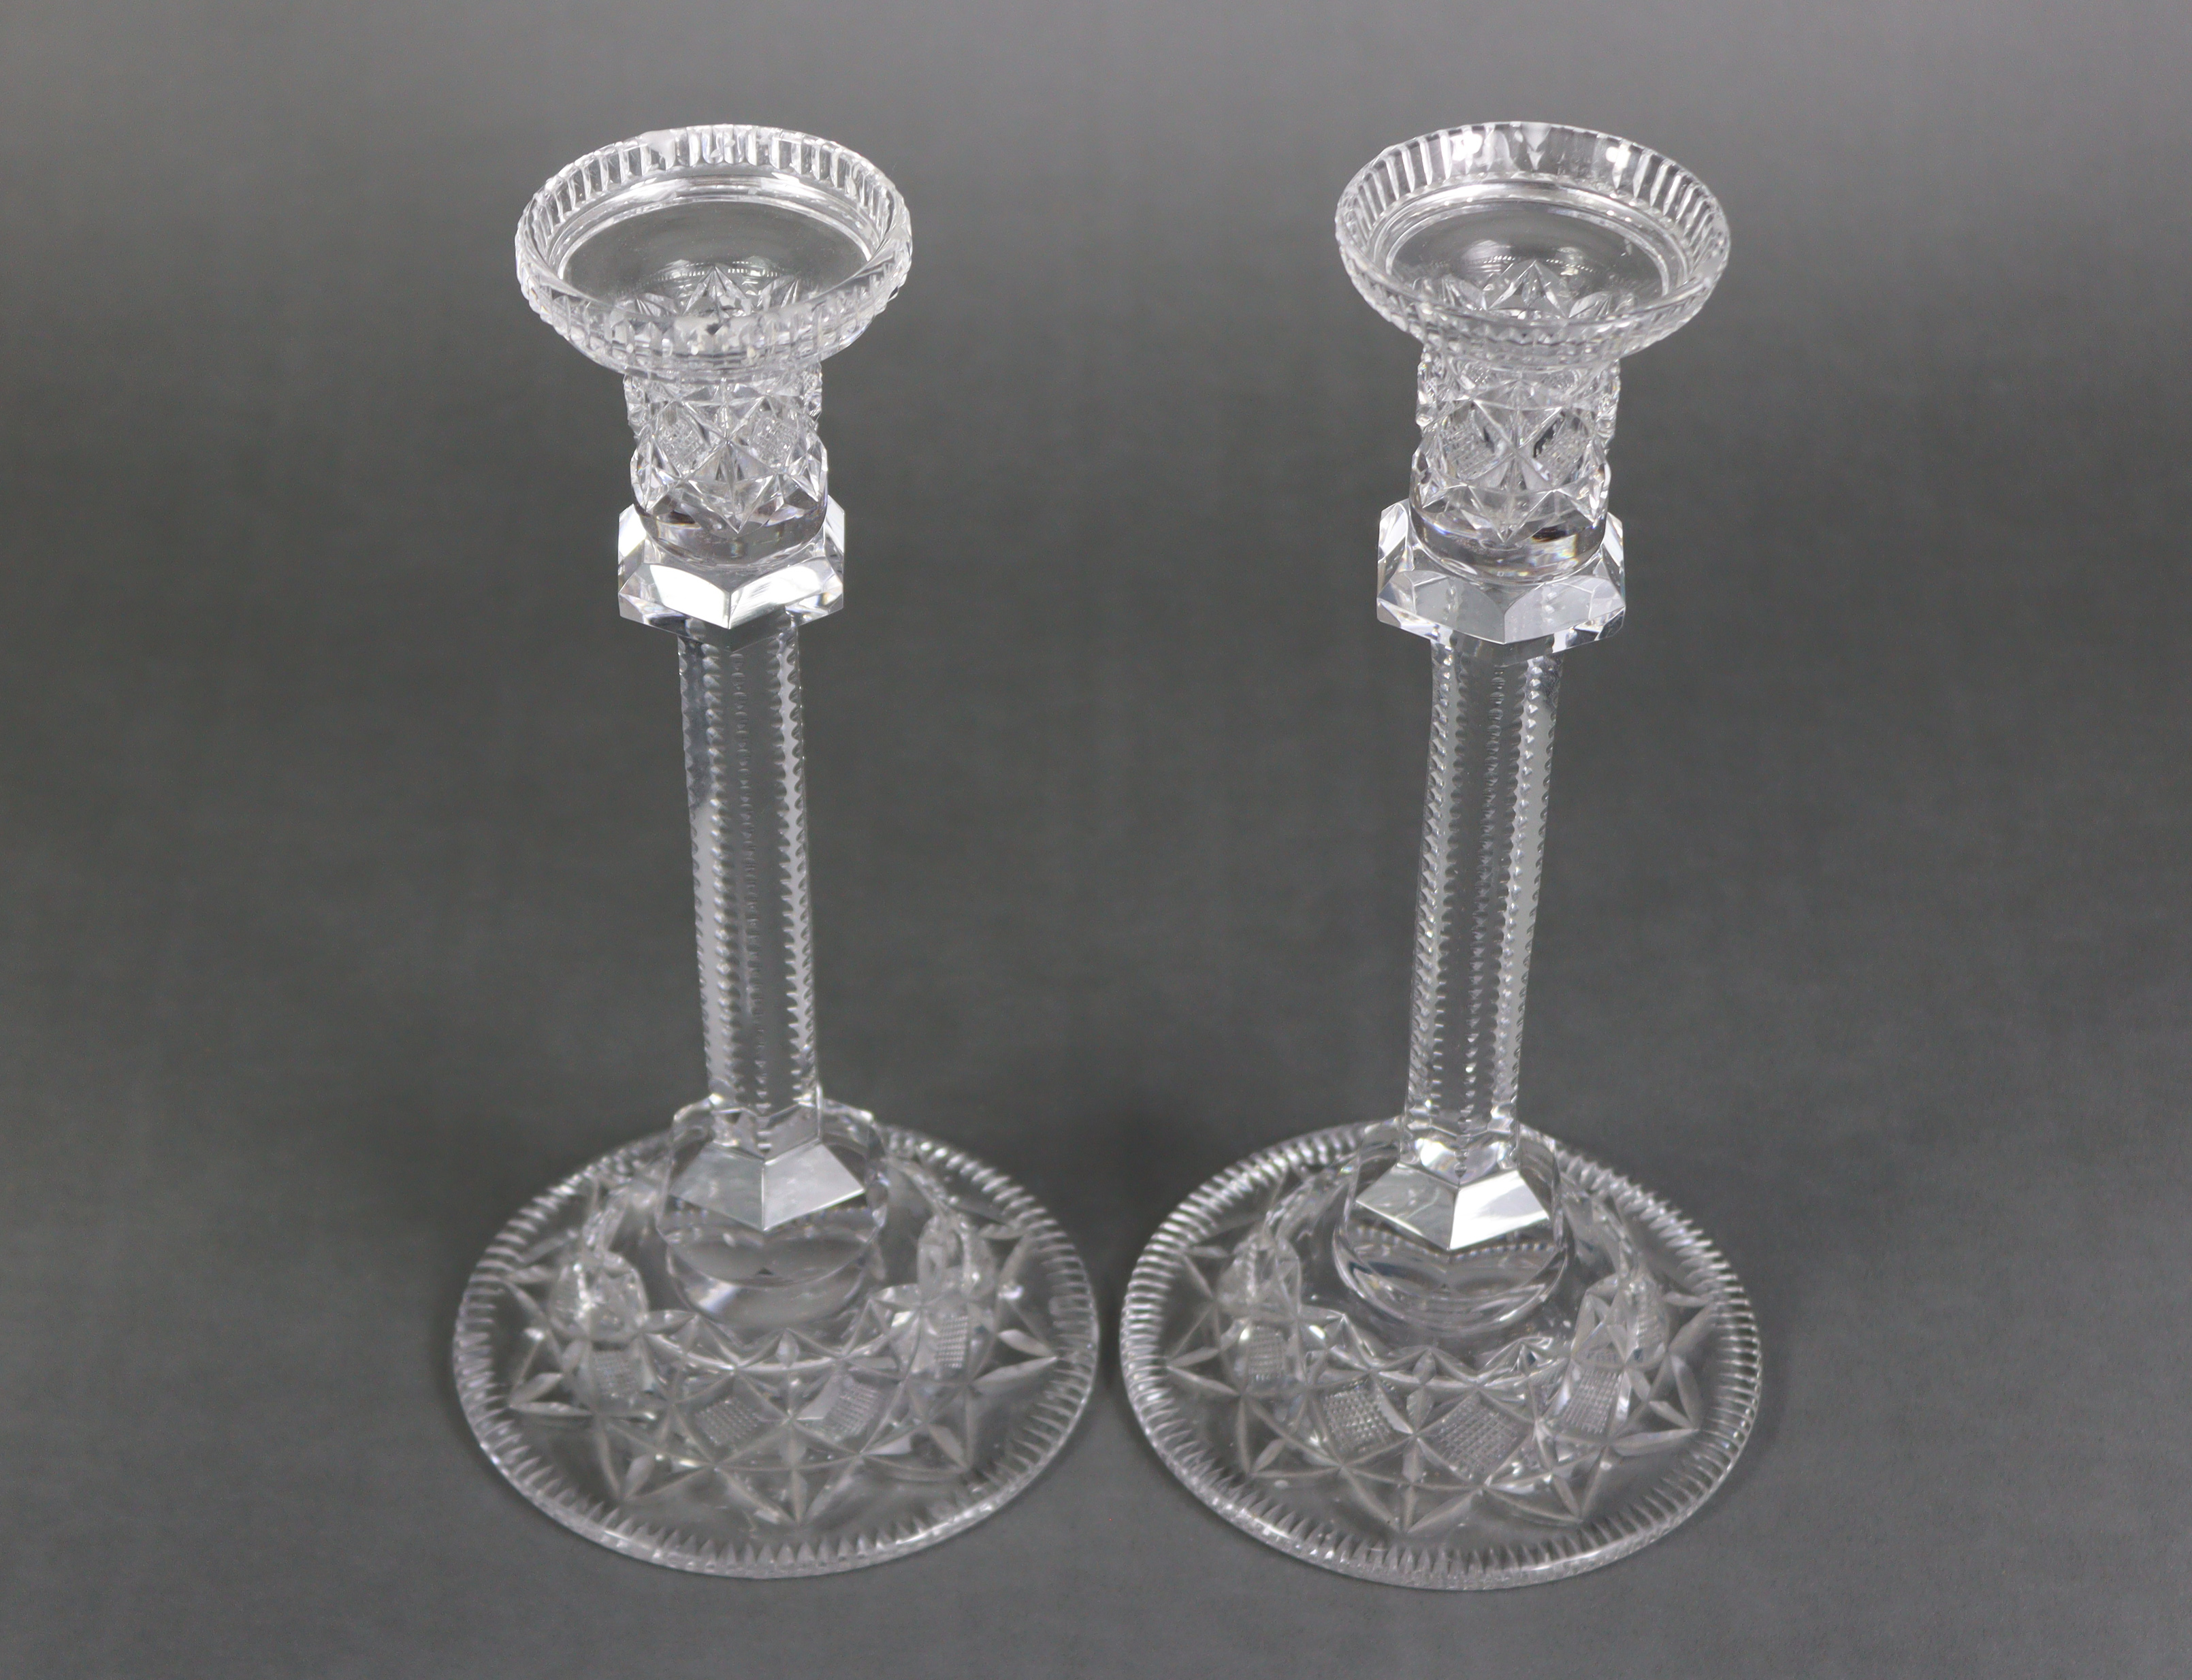 A pair of large cut-glass candlesticks, each with hobnail decoration, hexagonal faceted column, & - Image 3 of 10